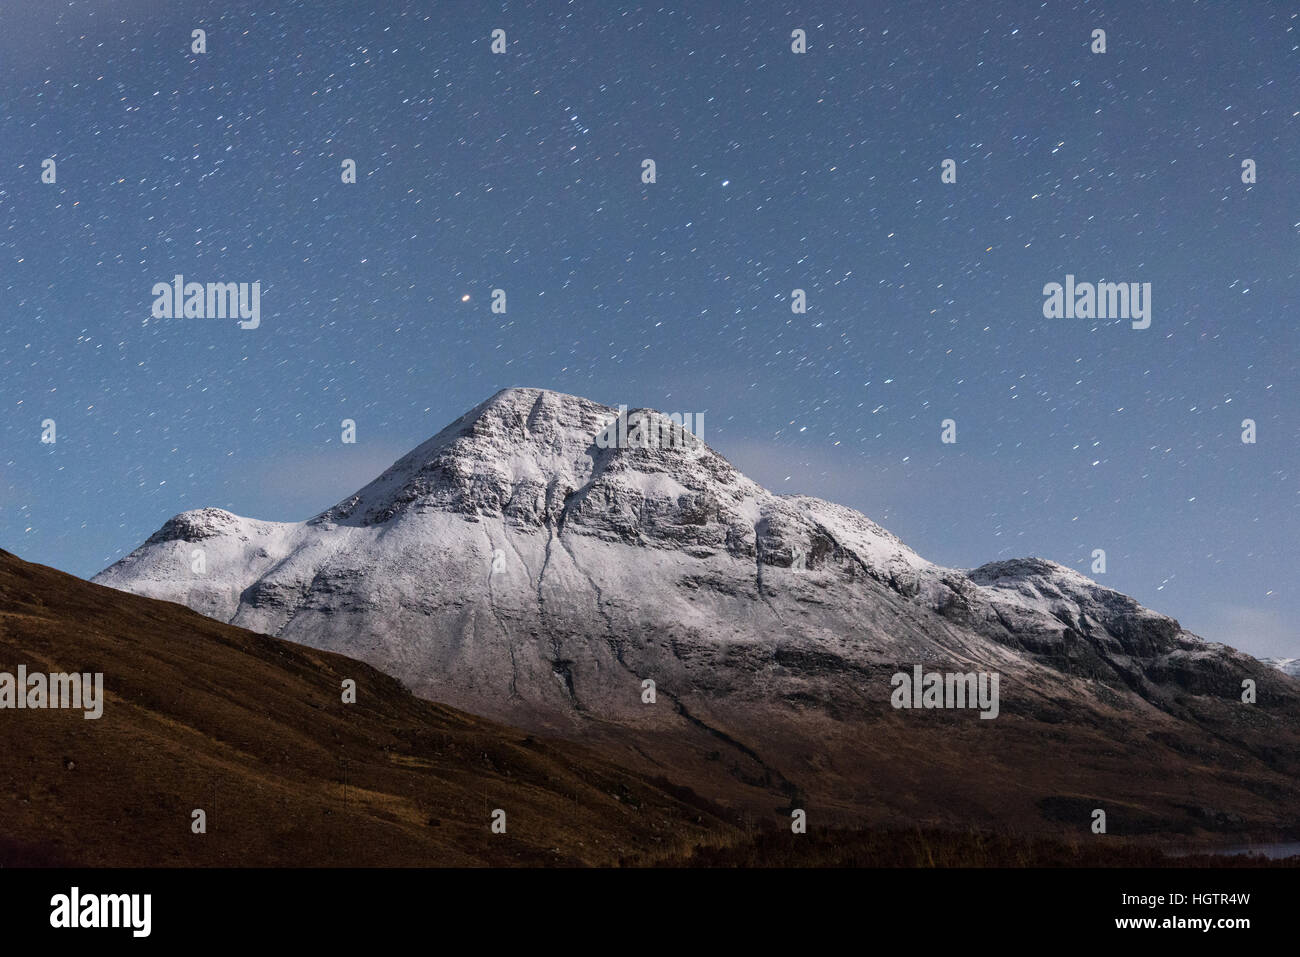 mountain illuminated by soft moonlight at night with snow and stars Stock Photo